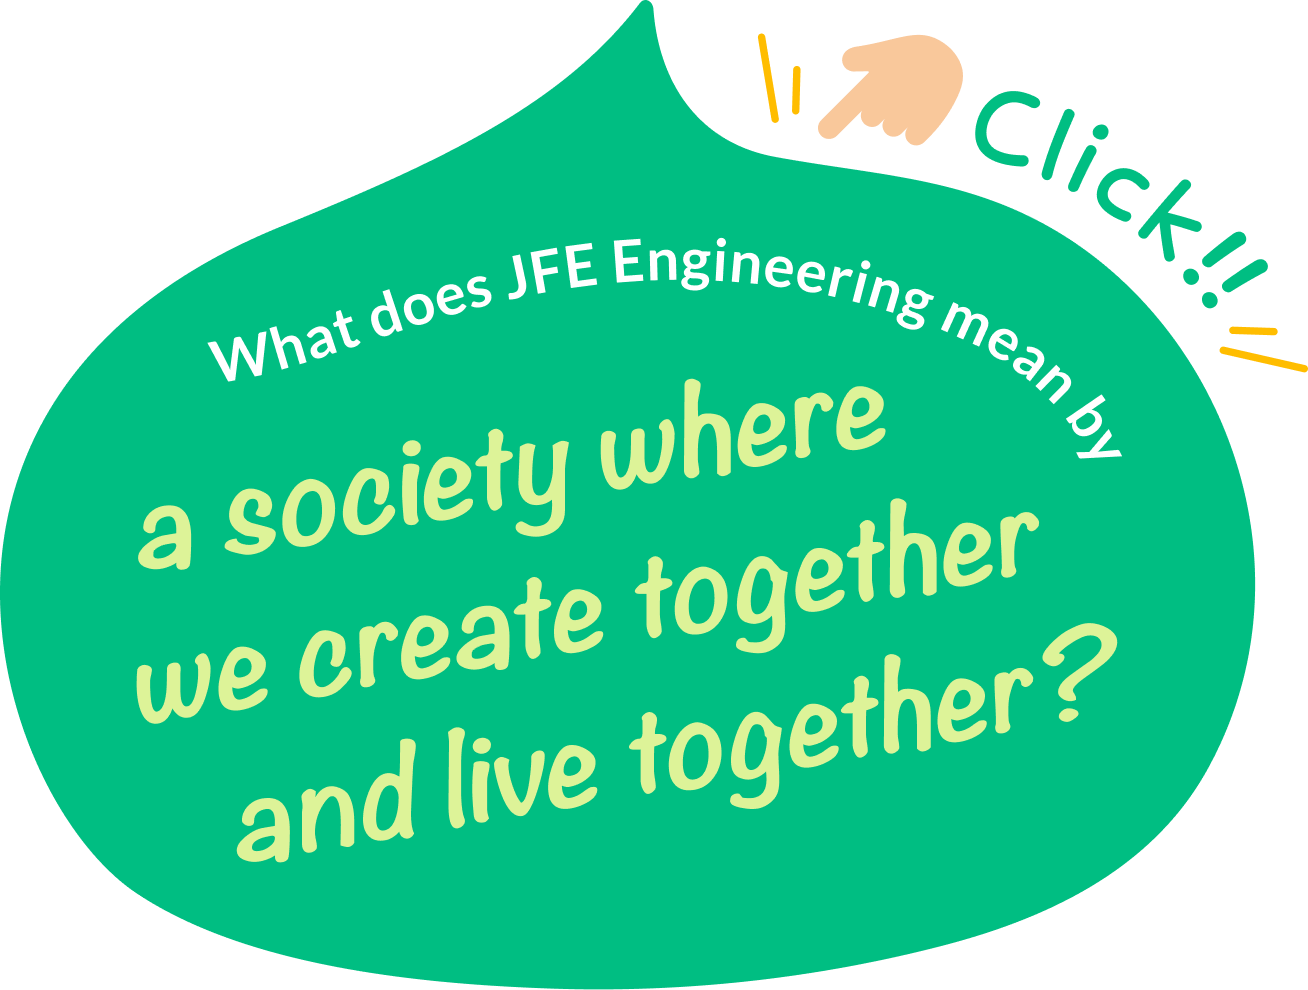 What does JFE Engineering mean by a society that we create together and live together in?